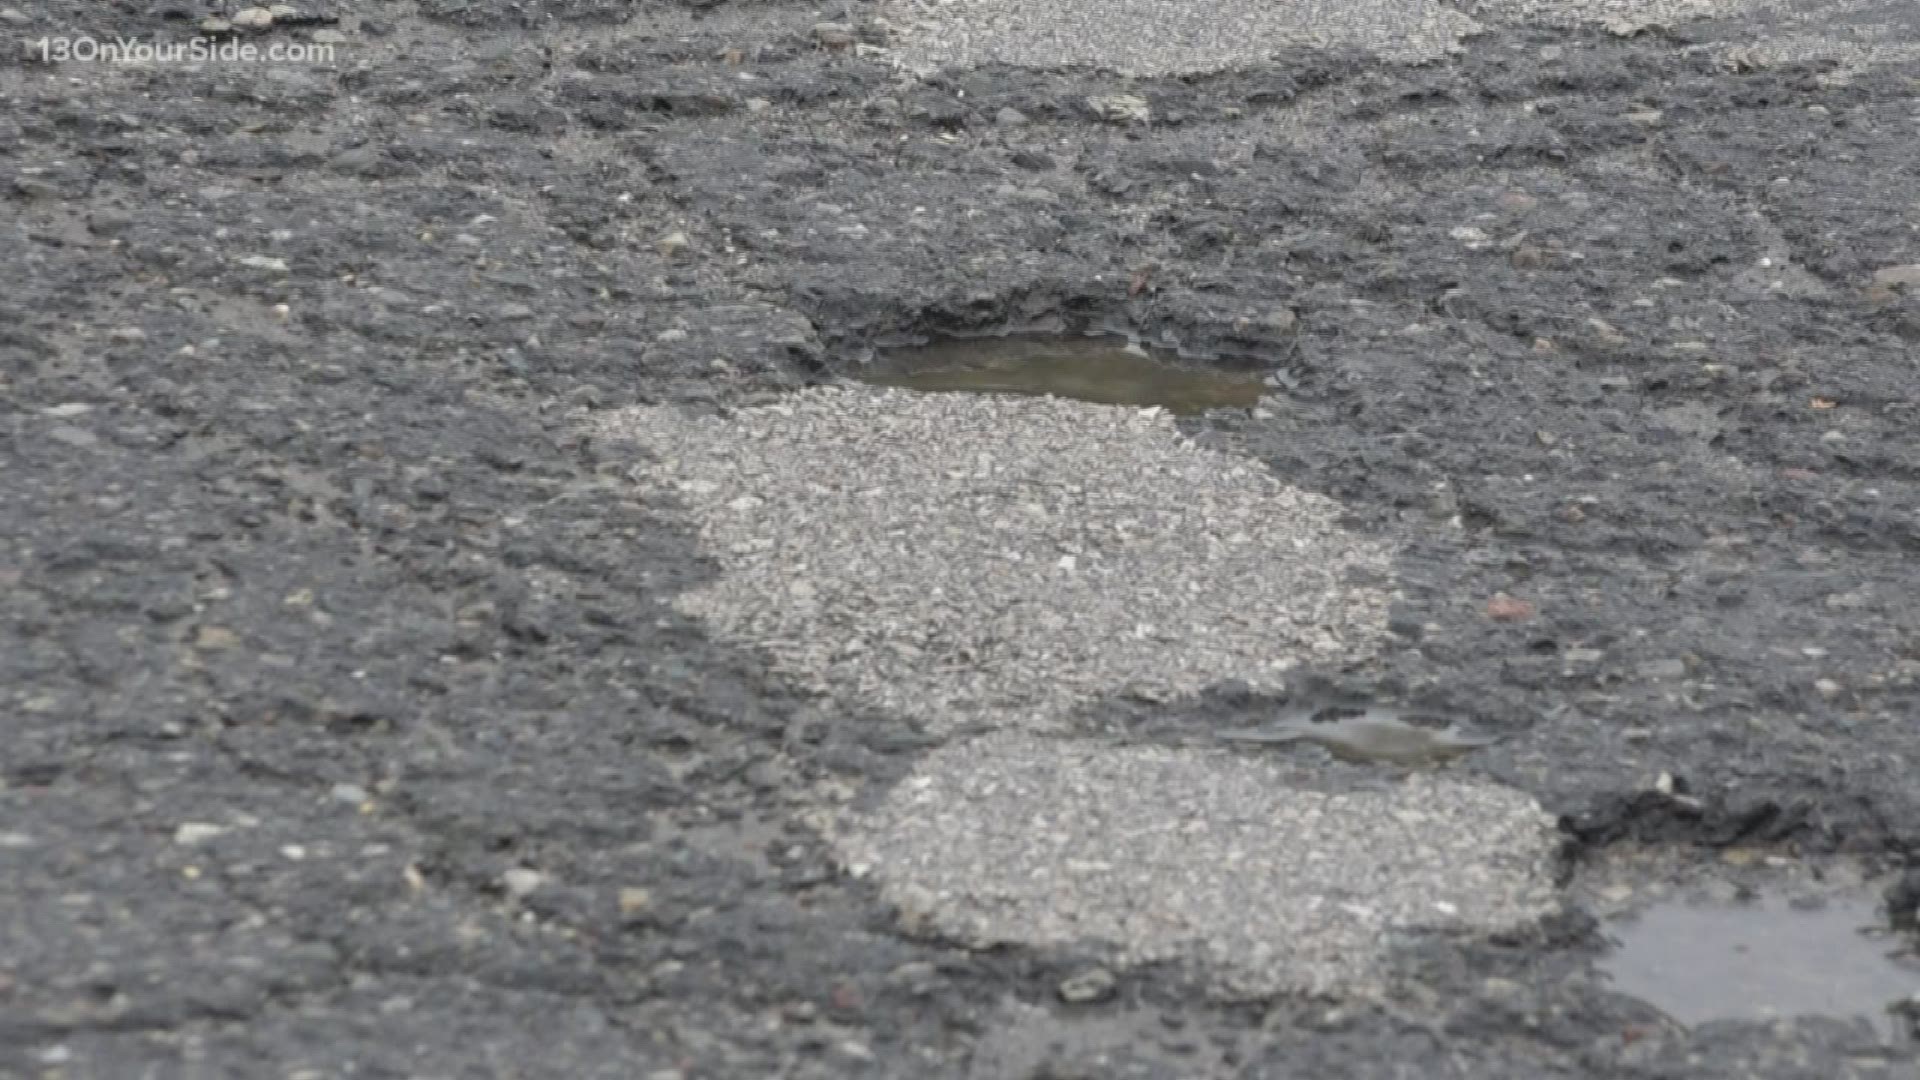 The city of Lowell asked voters to approve an income tax to help repair the city's roads. A majority of them said no.